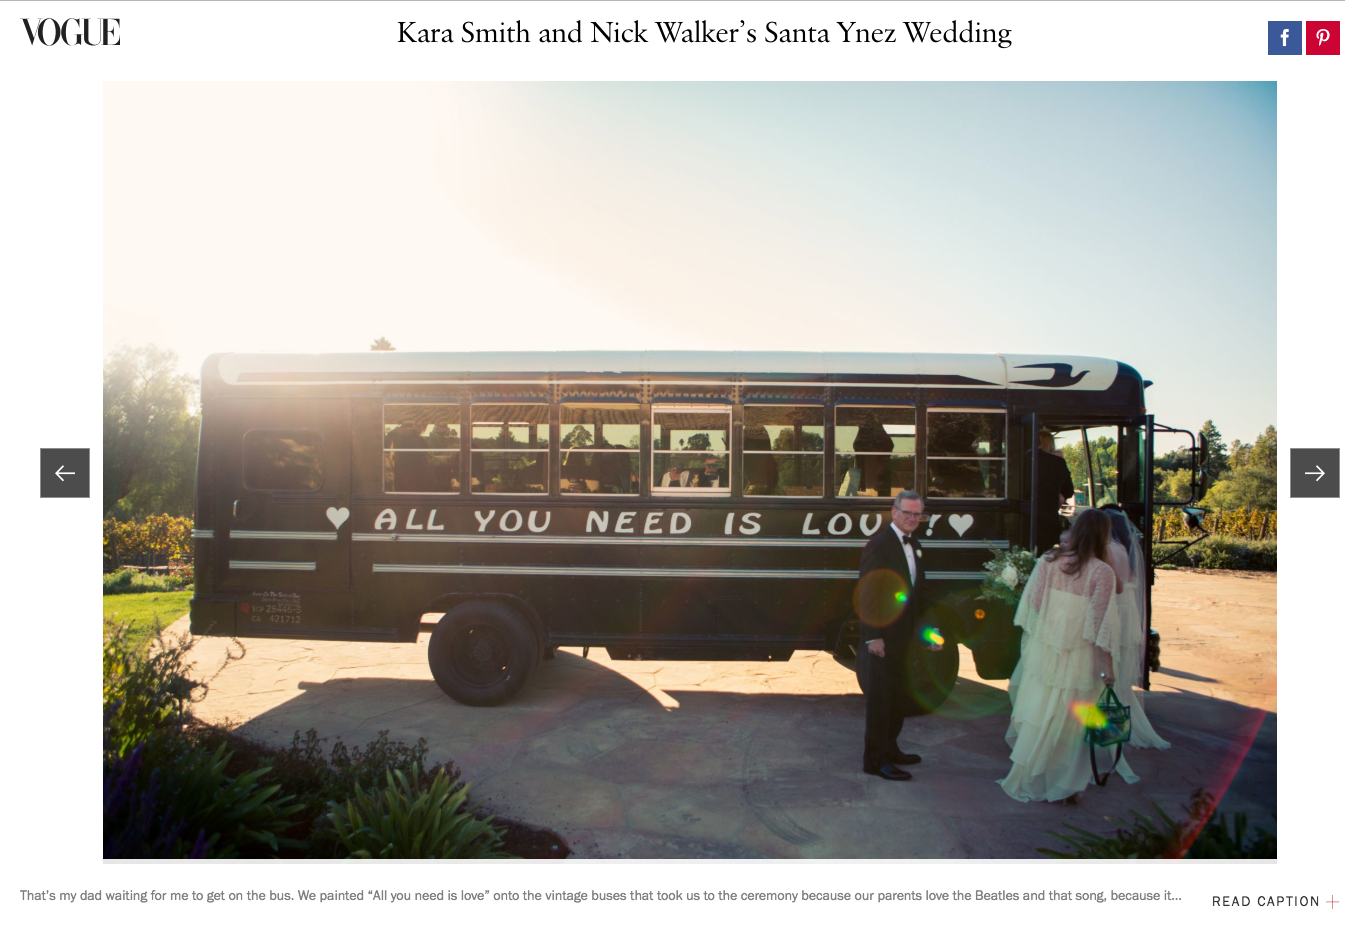 Jump On The School Bus Featured in Vogue | Photo Cred: Pat Martin and M. Corey Witted